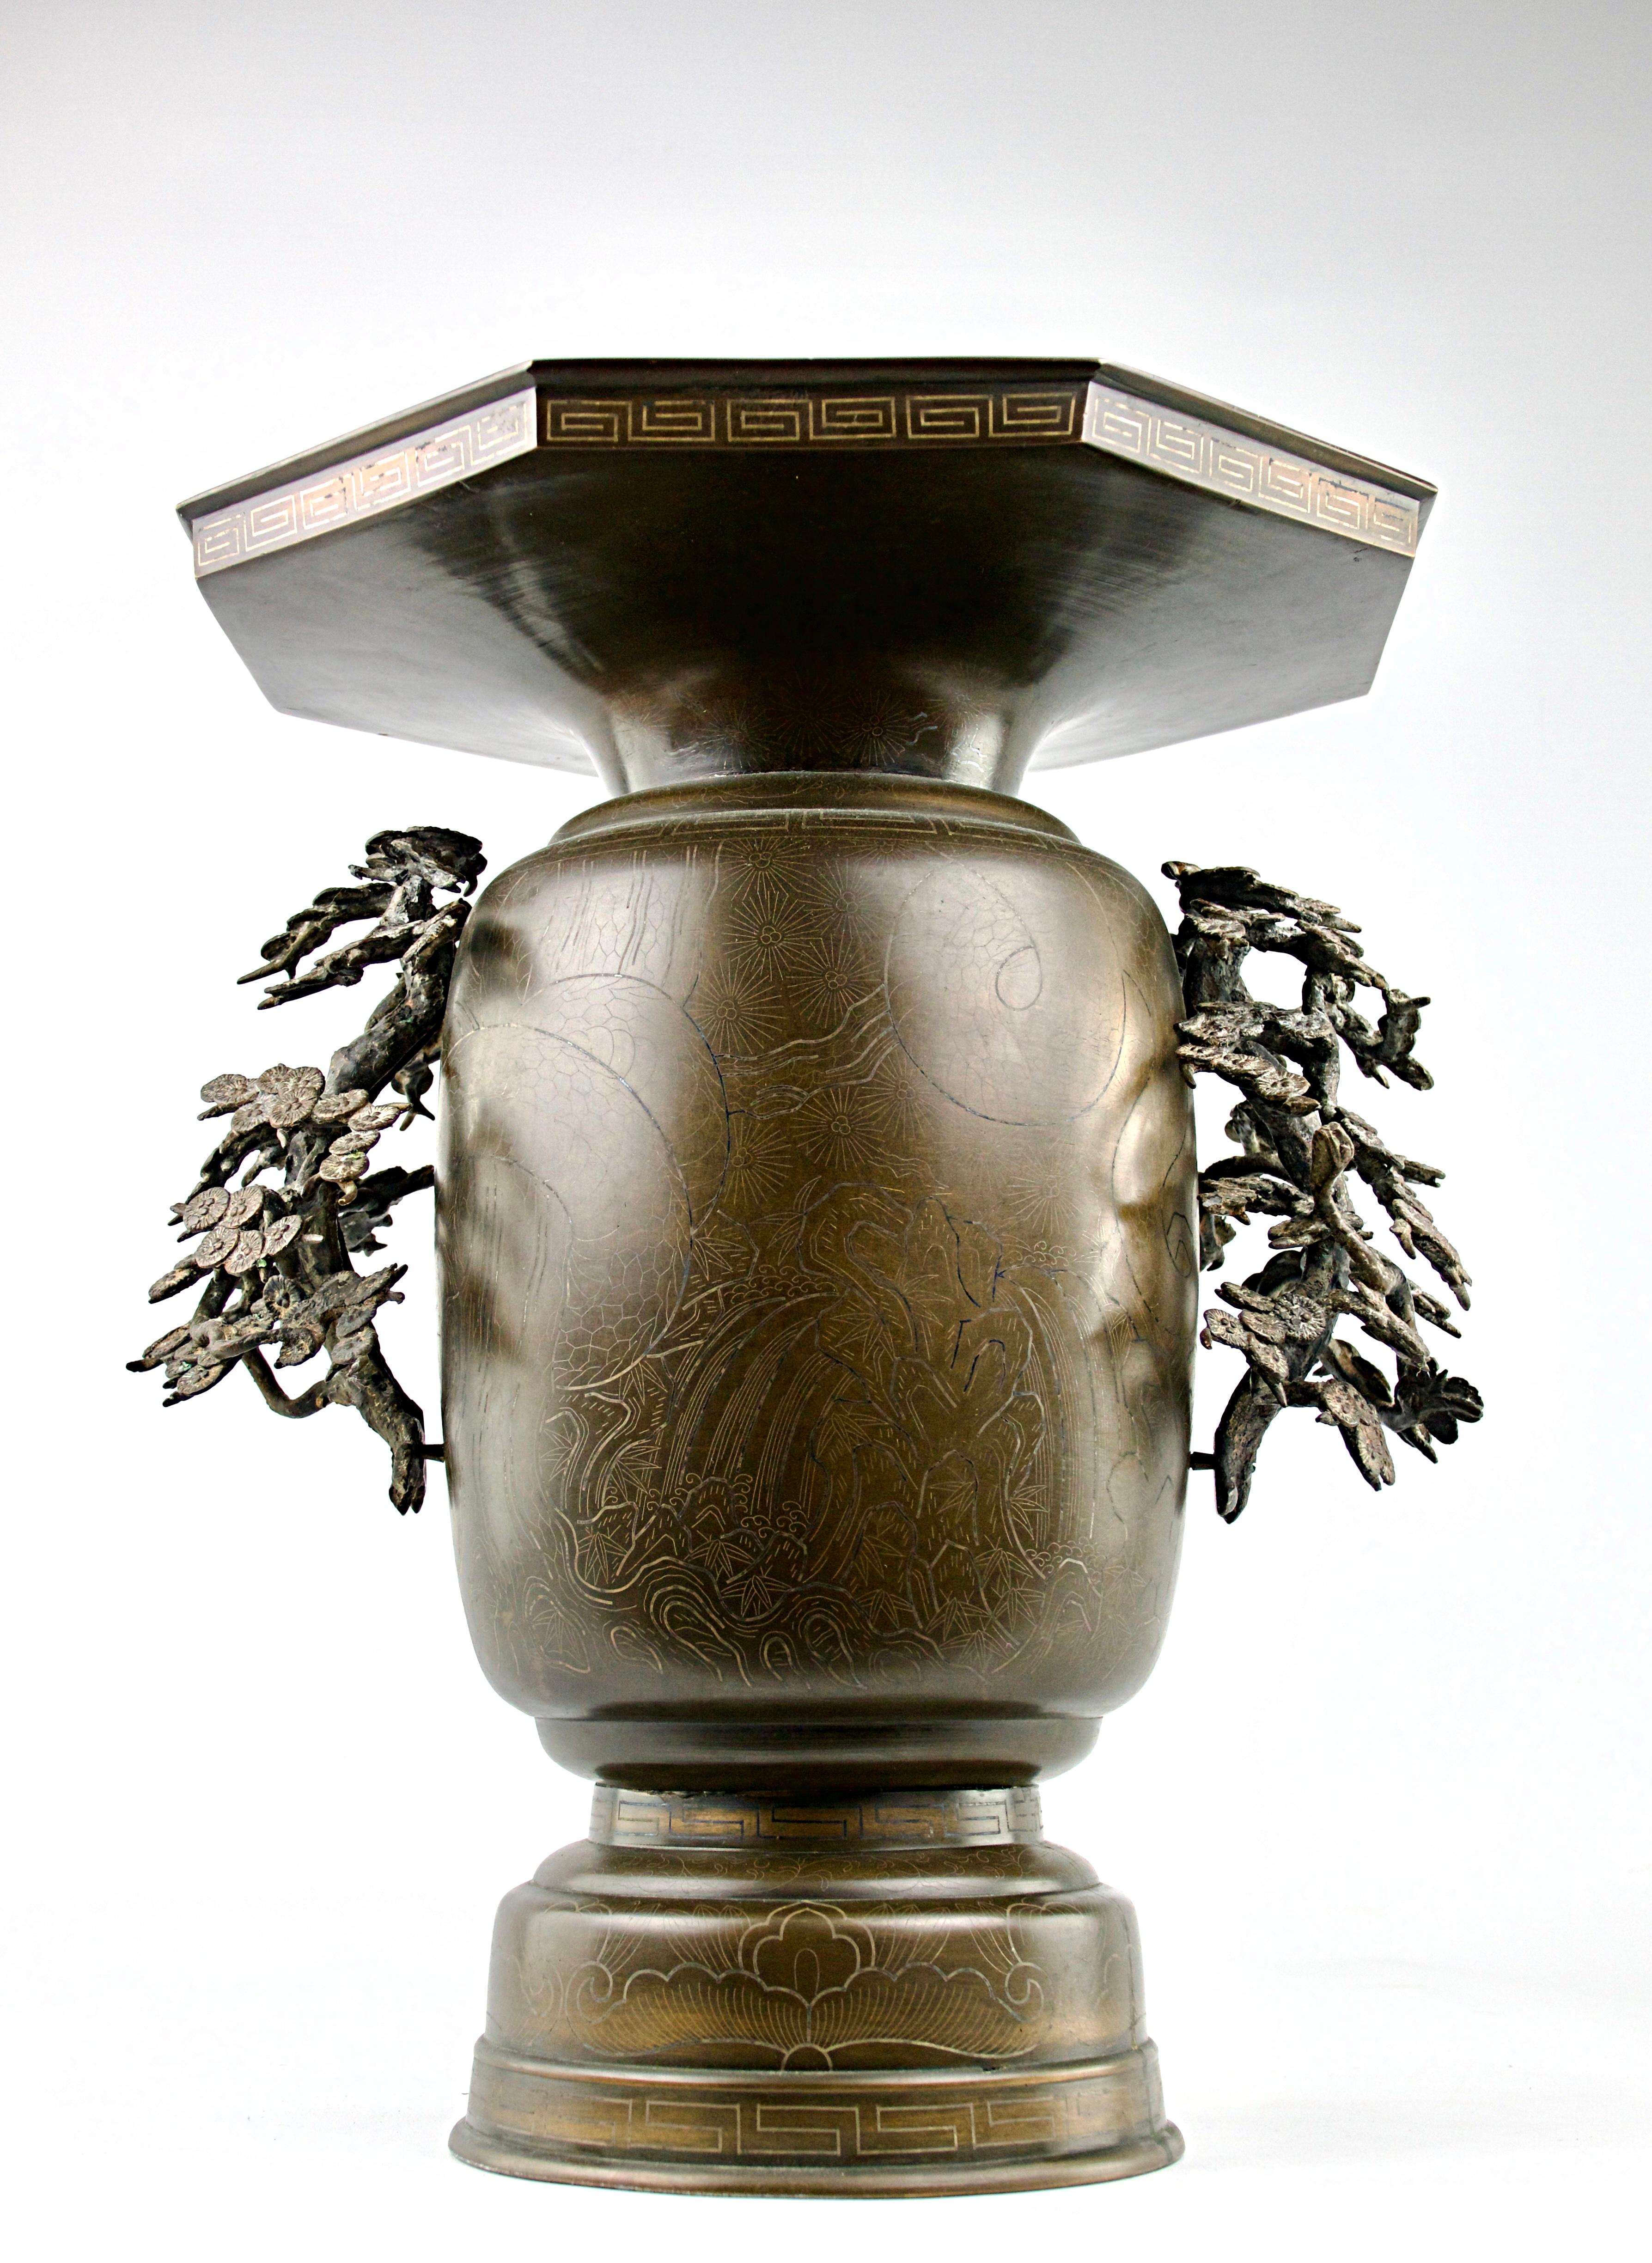 Beautiful and rare Japanese vase from the 18th/19th century. Superb silver inlay work showcasing a Samuraï fighting off a dragon snake with an additional dragon on top of the lid. Additional detailed decorations of chrysanthemums and lily